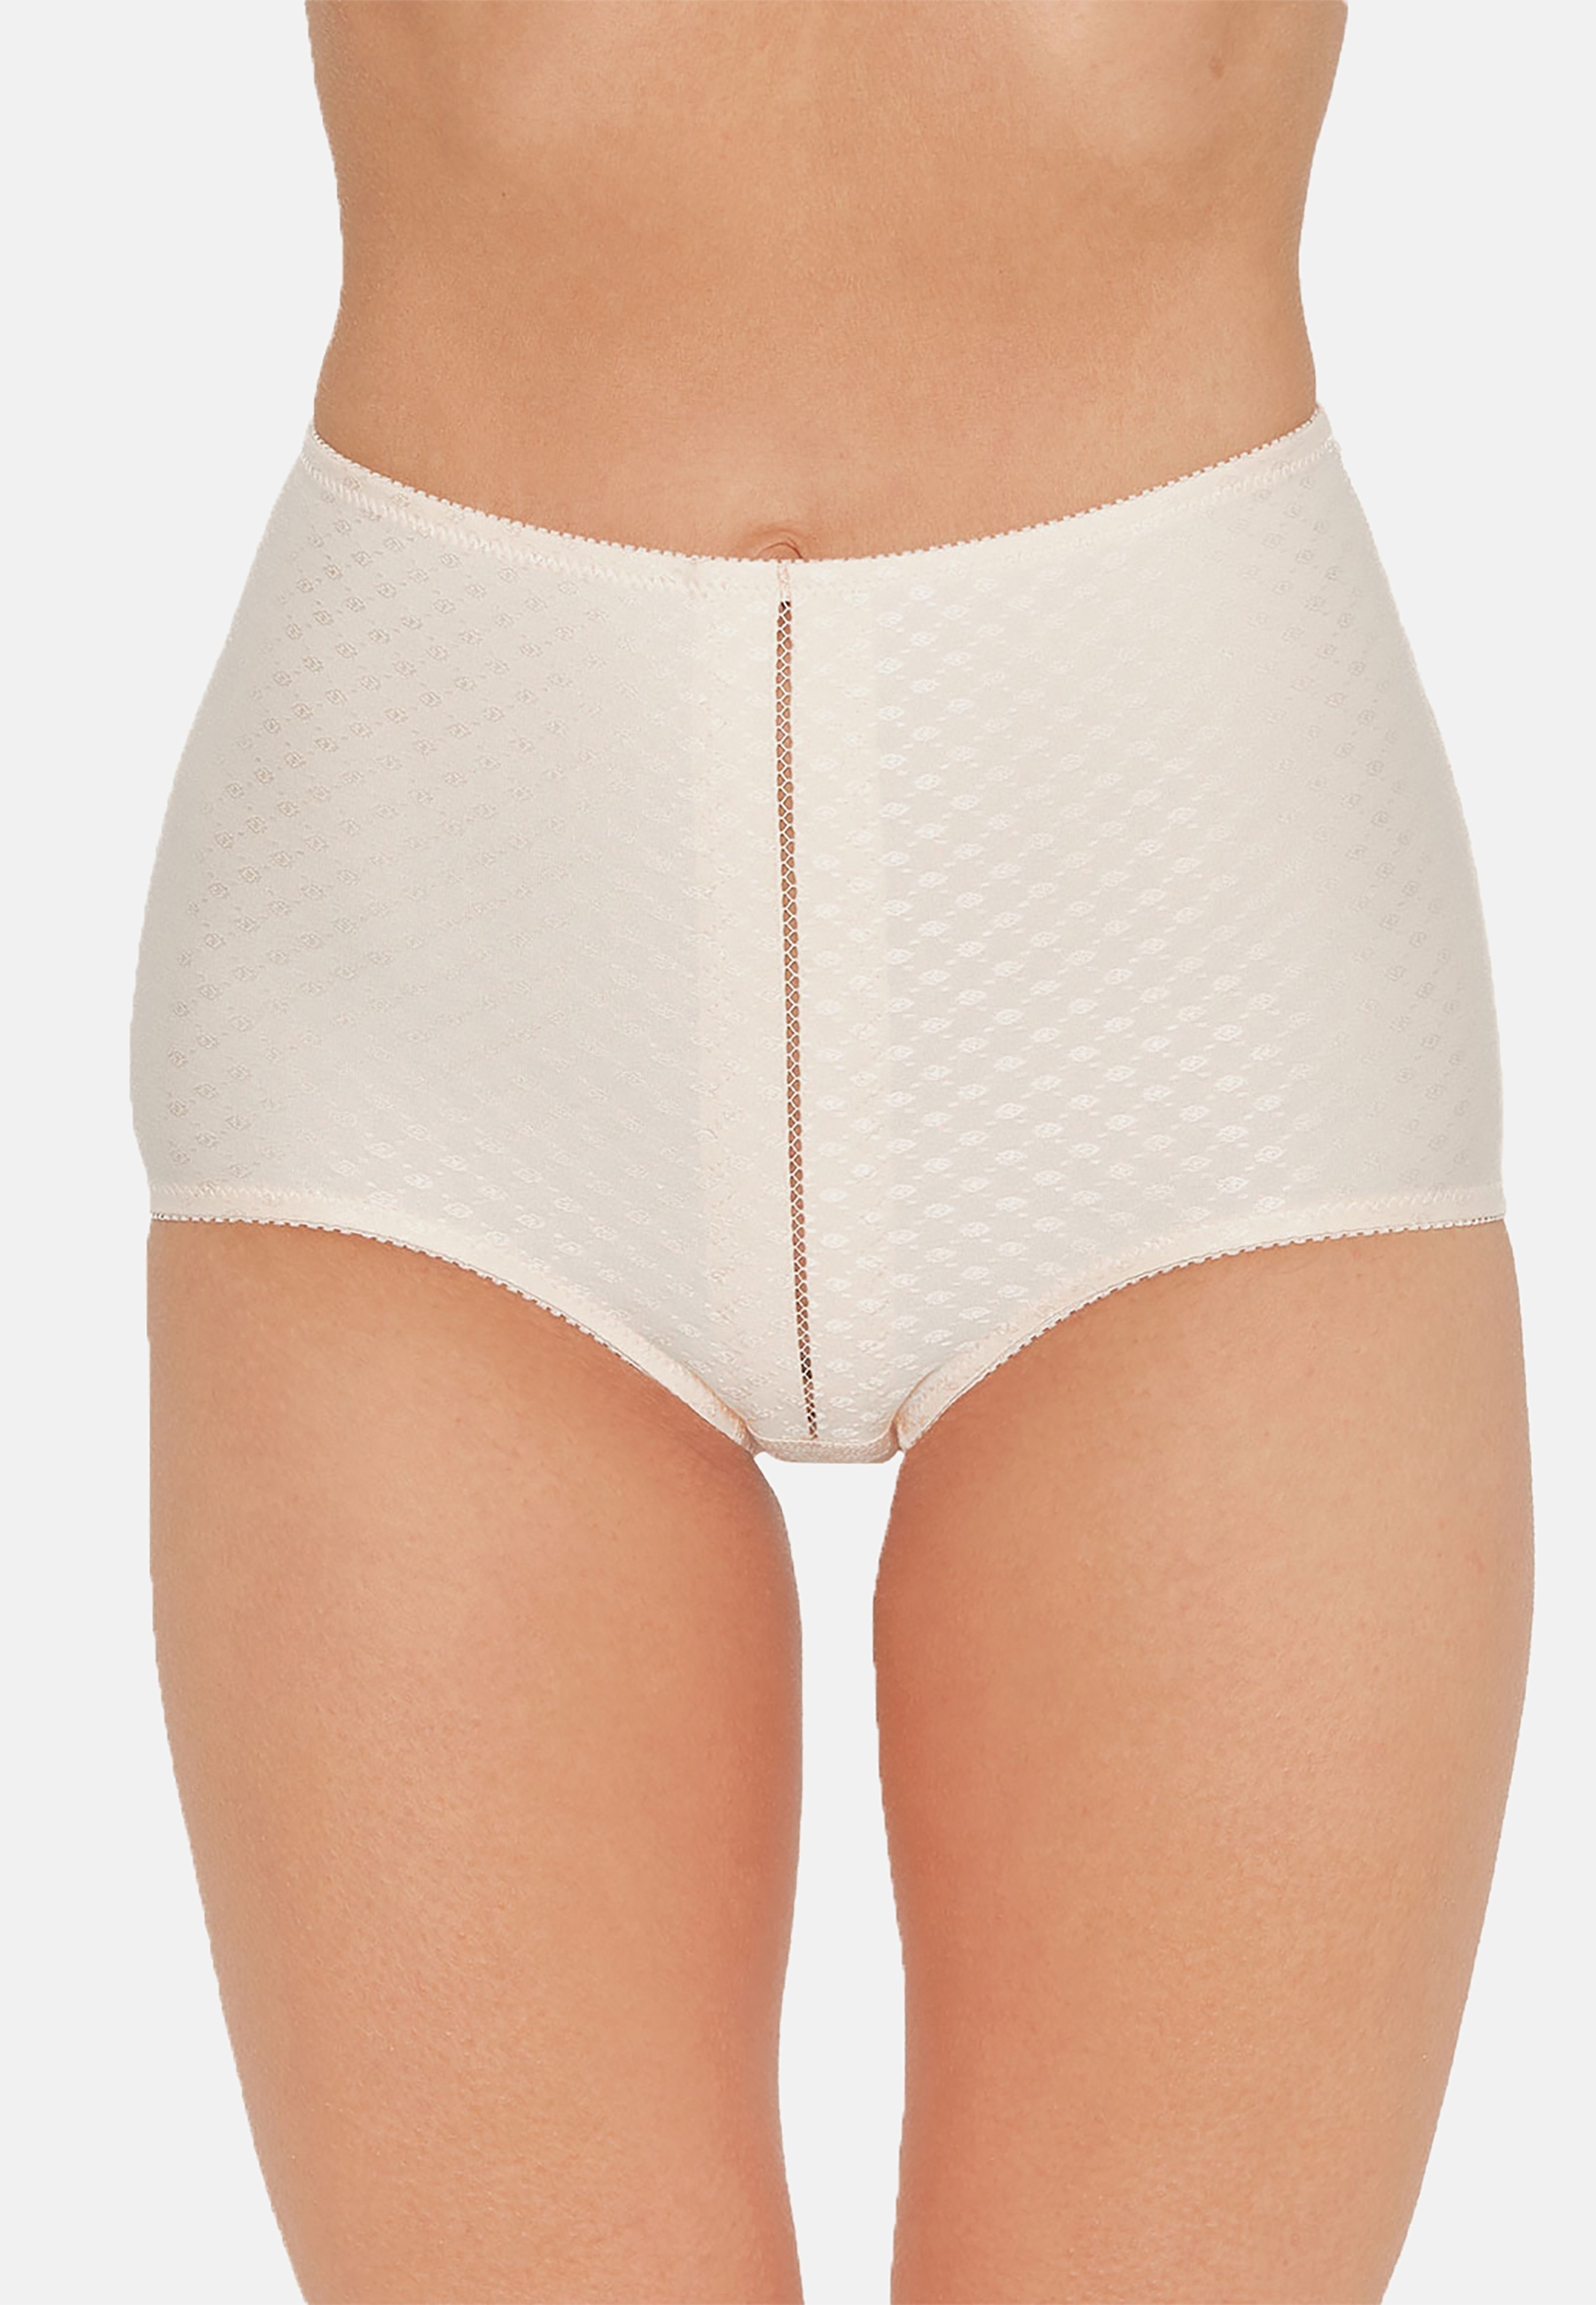 Susa Miederhose Classic 5108 Gr. 65 in shell